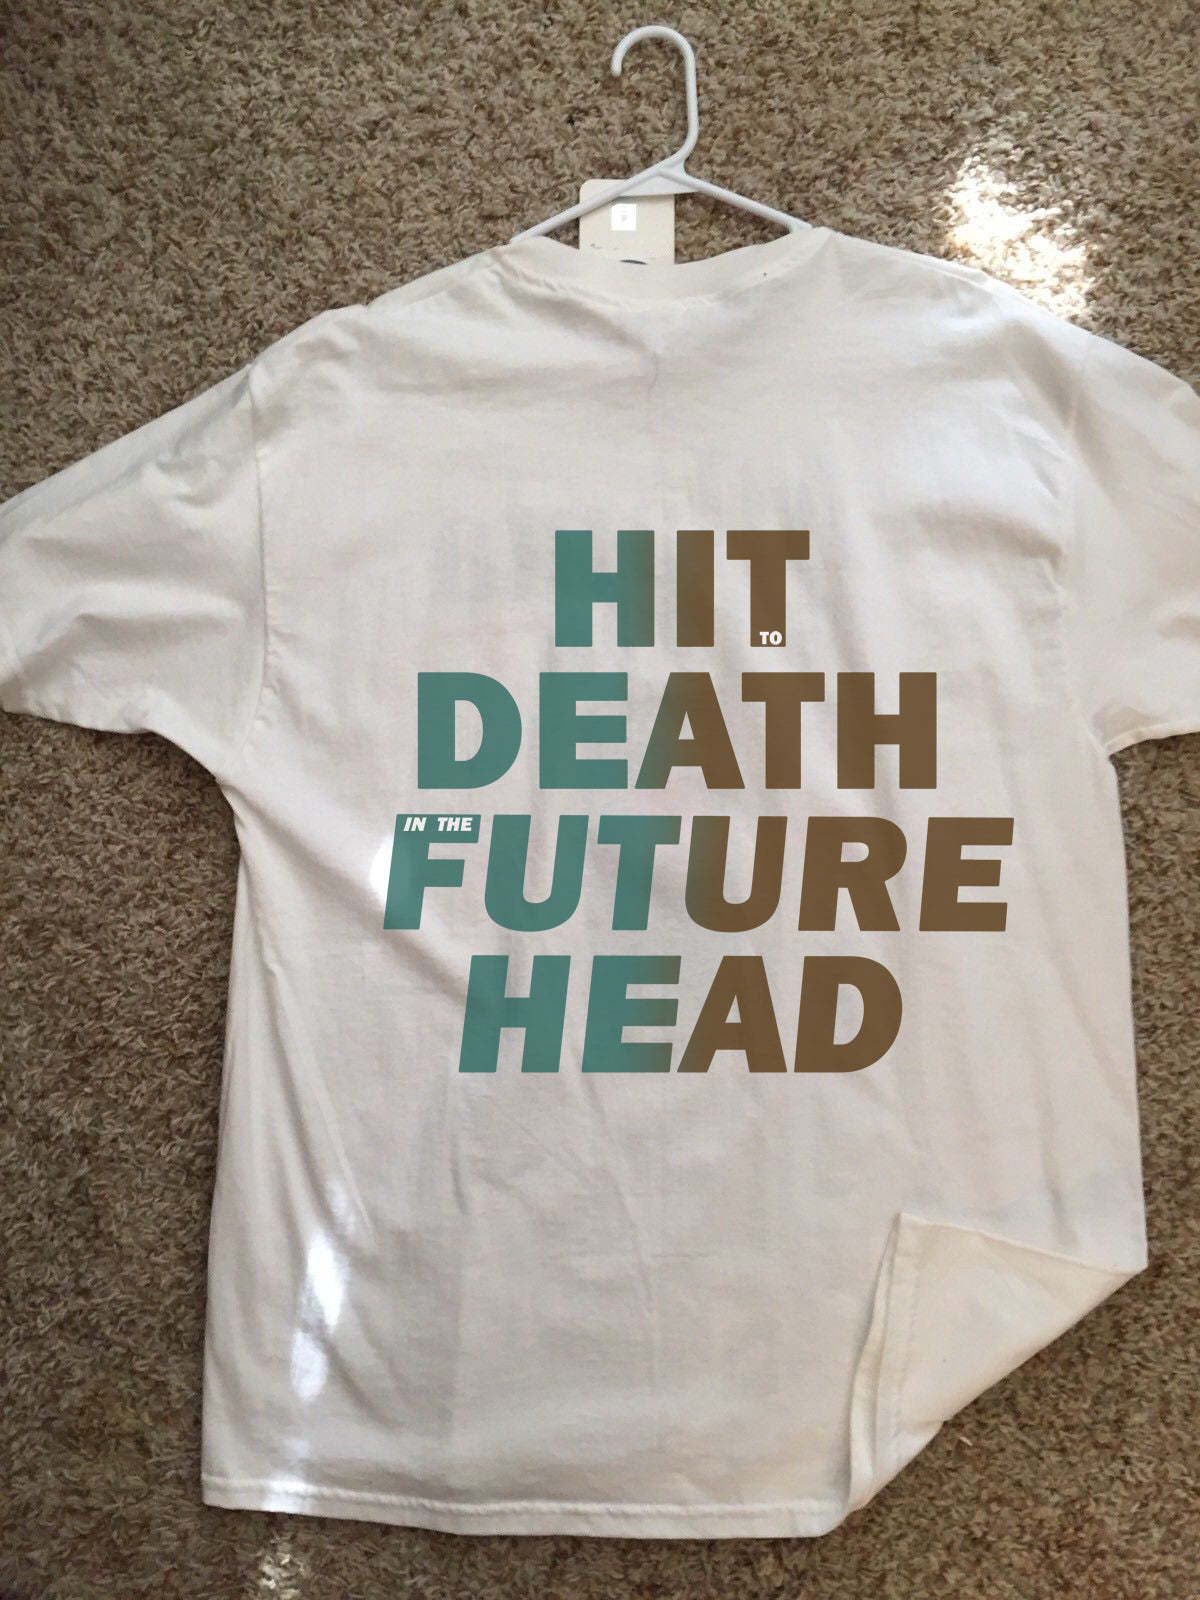 Vintage VTG 90’s Flaming Lips Hit To Death In The Future Head